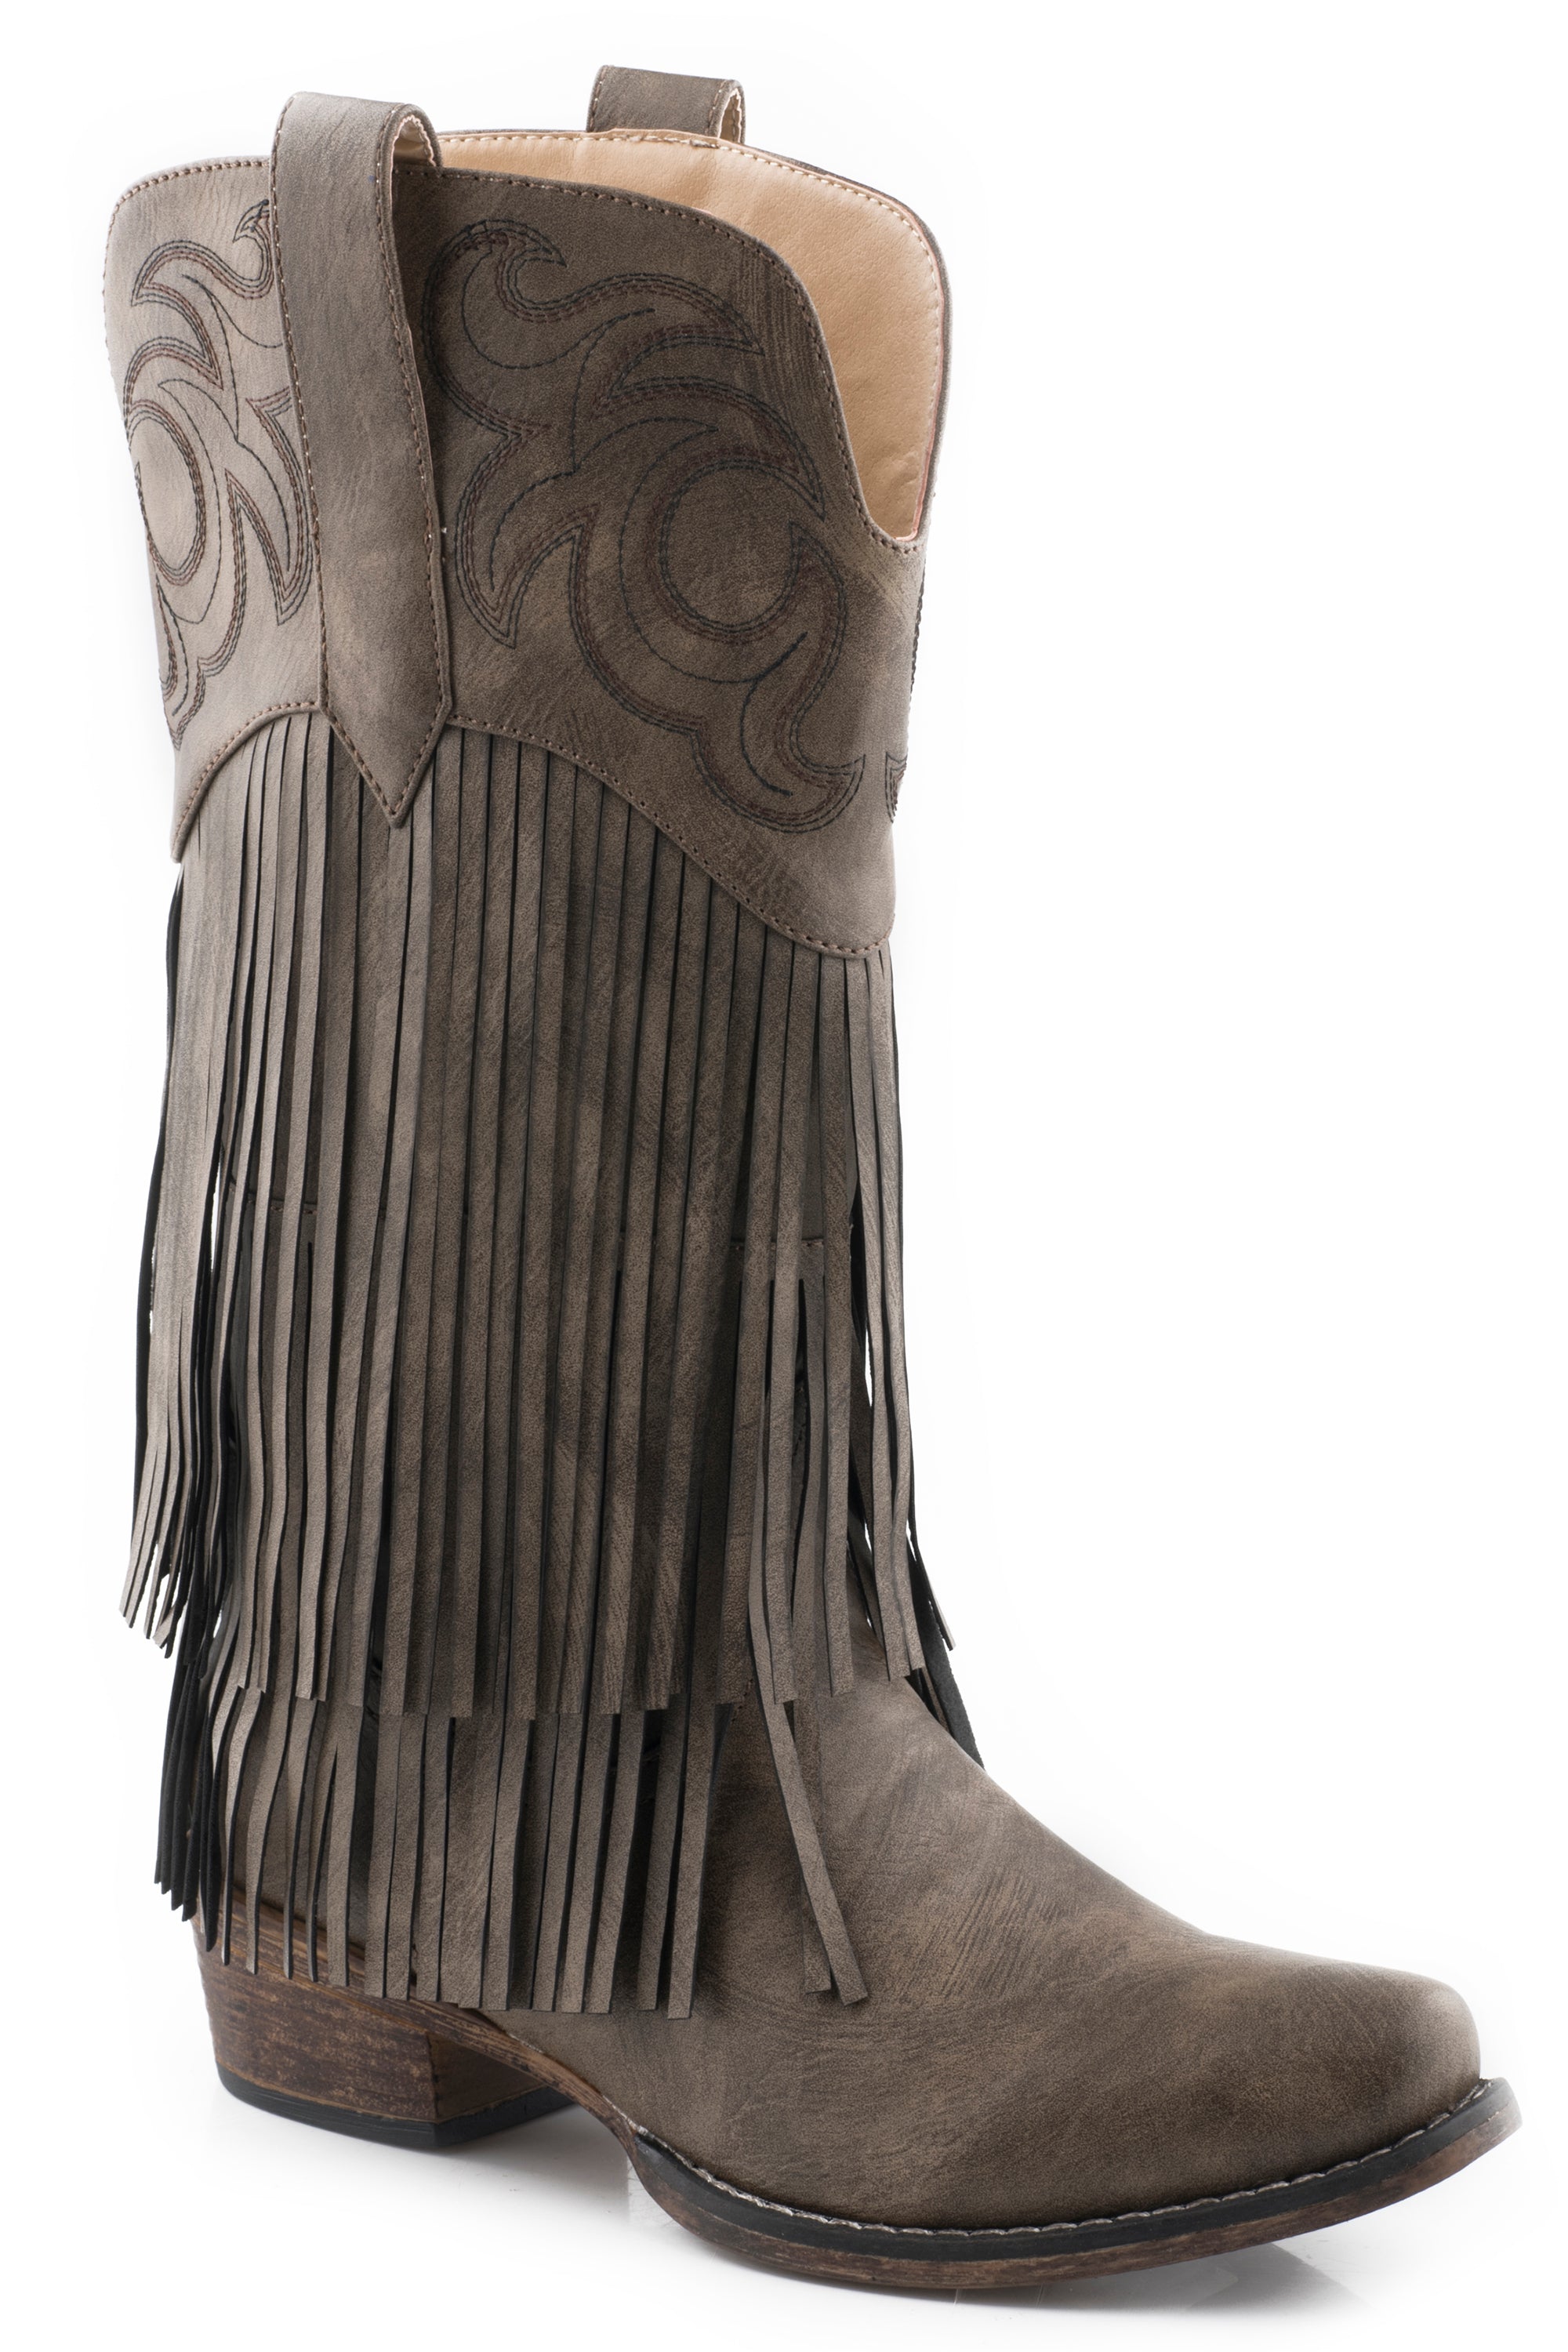 Roper Womens Brown Smooth Fringe Boot